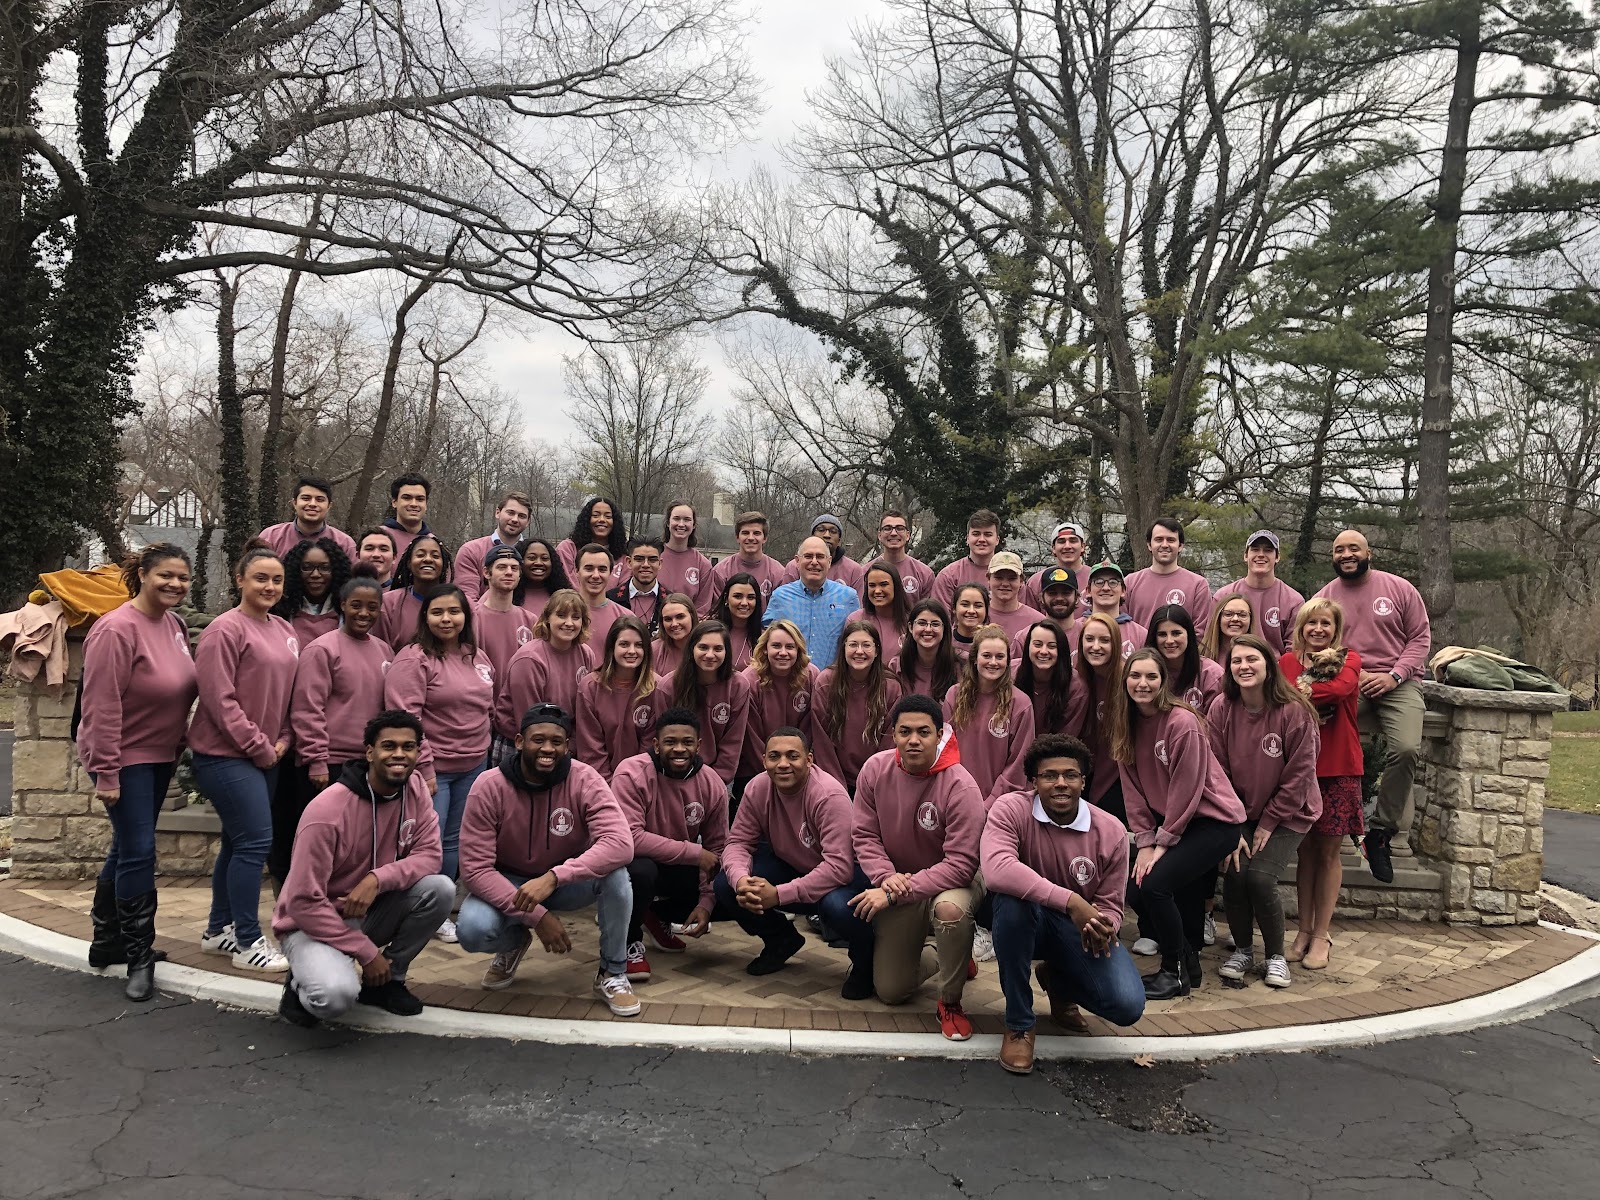 A large group of fraternity and sorority members posing for a photo